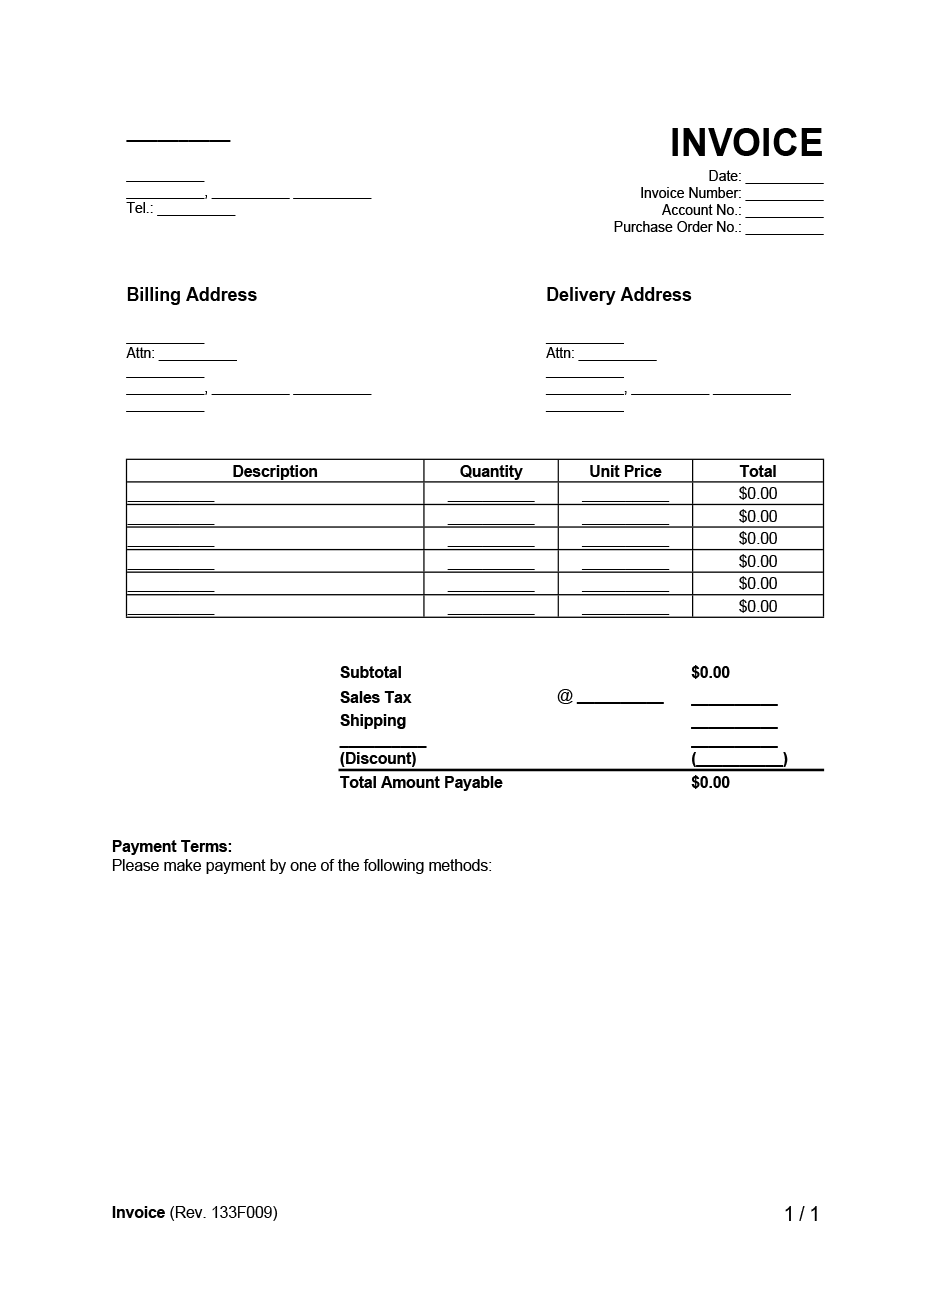 Invoice example form